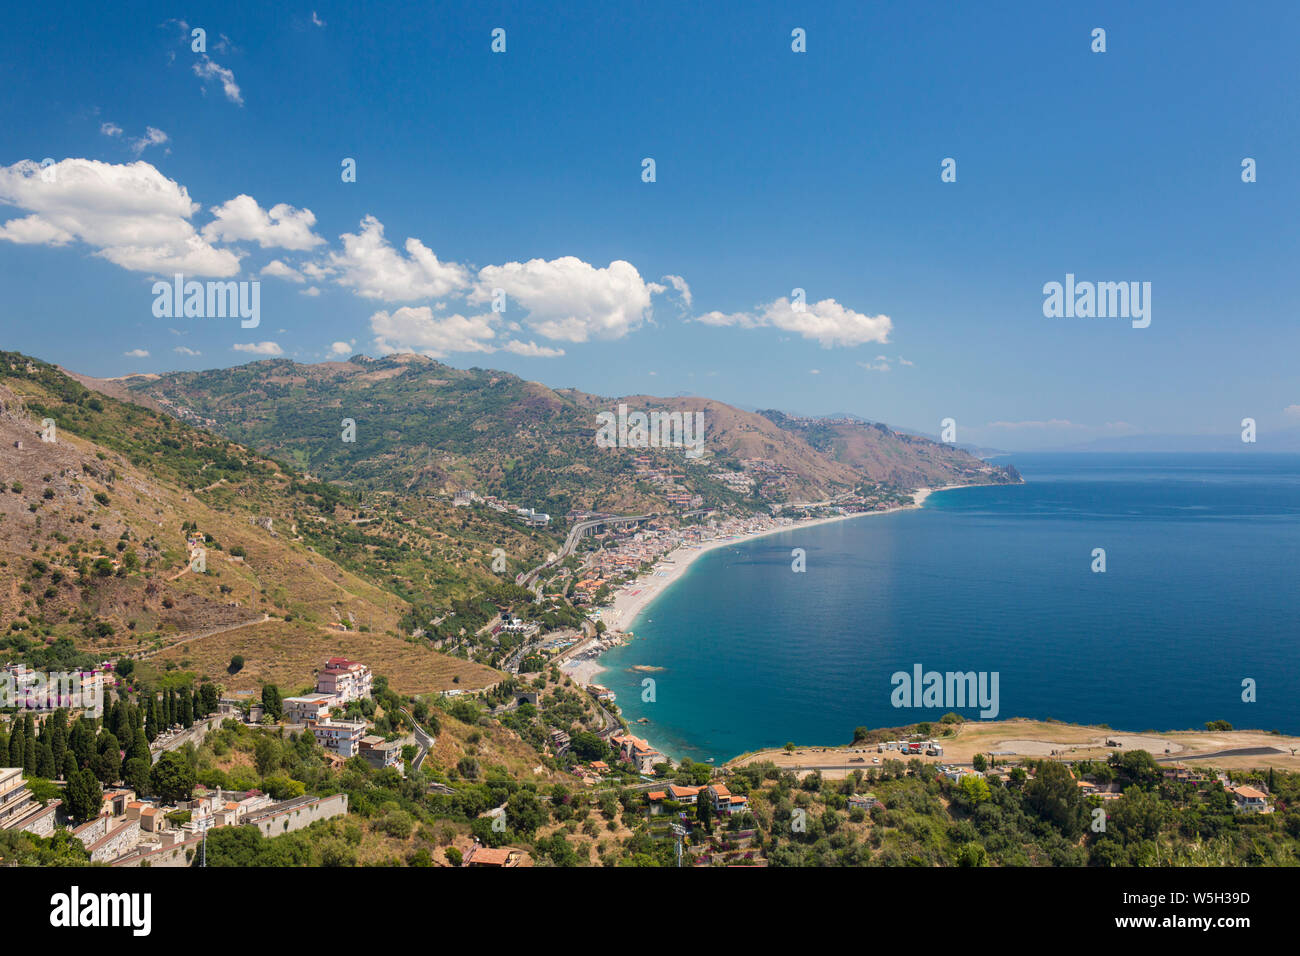 View from the Greek Theatre to the Ionian Sea beach resorts of Mazzeo and Letojanni, Taormina, Messina, Sicily, Italy, Mediterranean, Europe Stock Photo